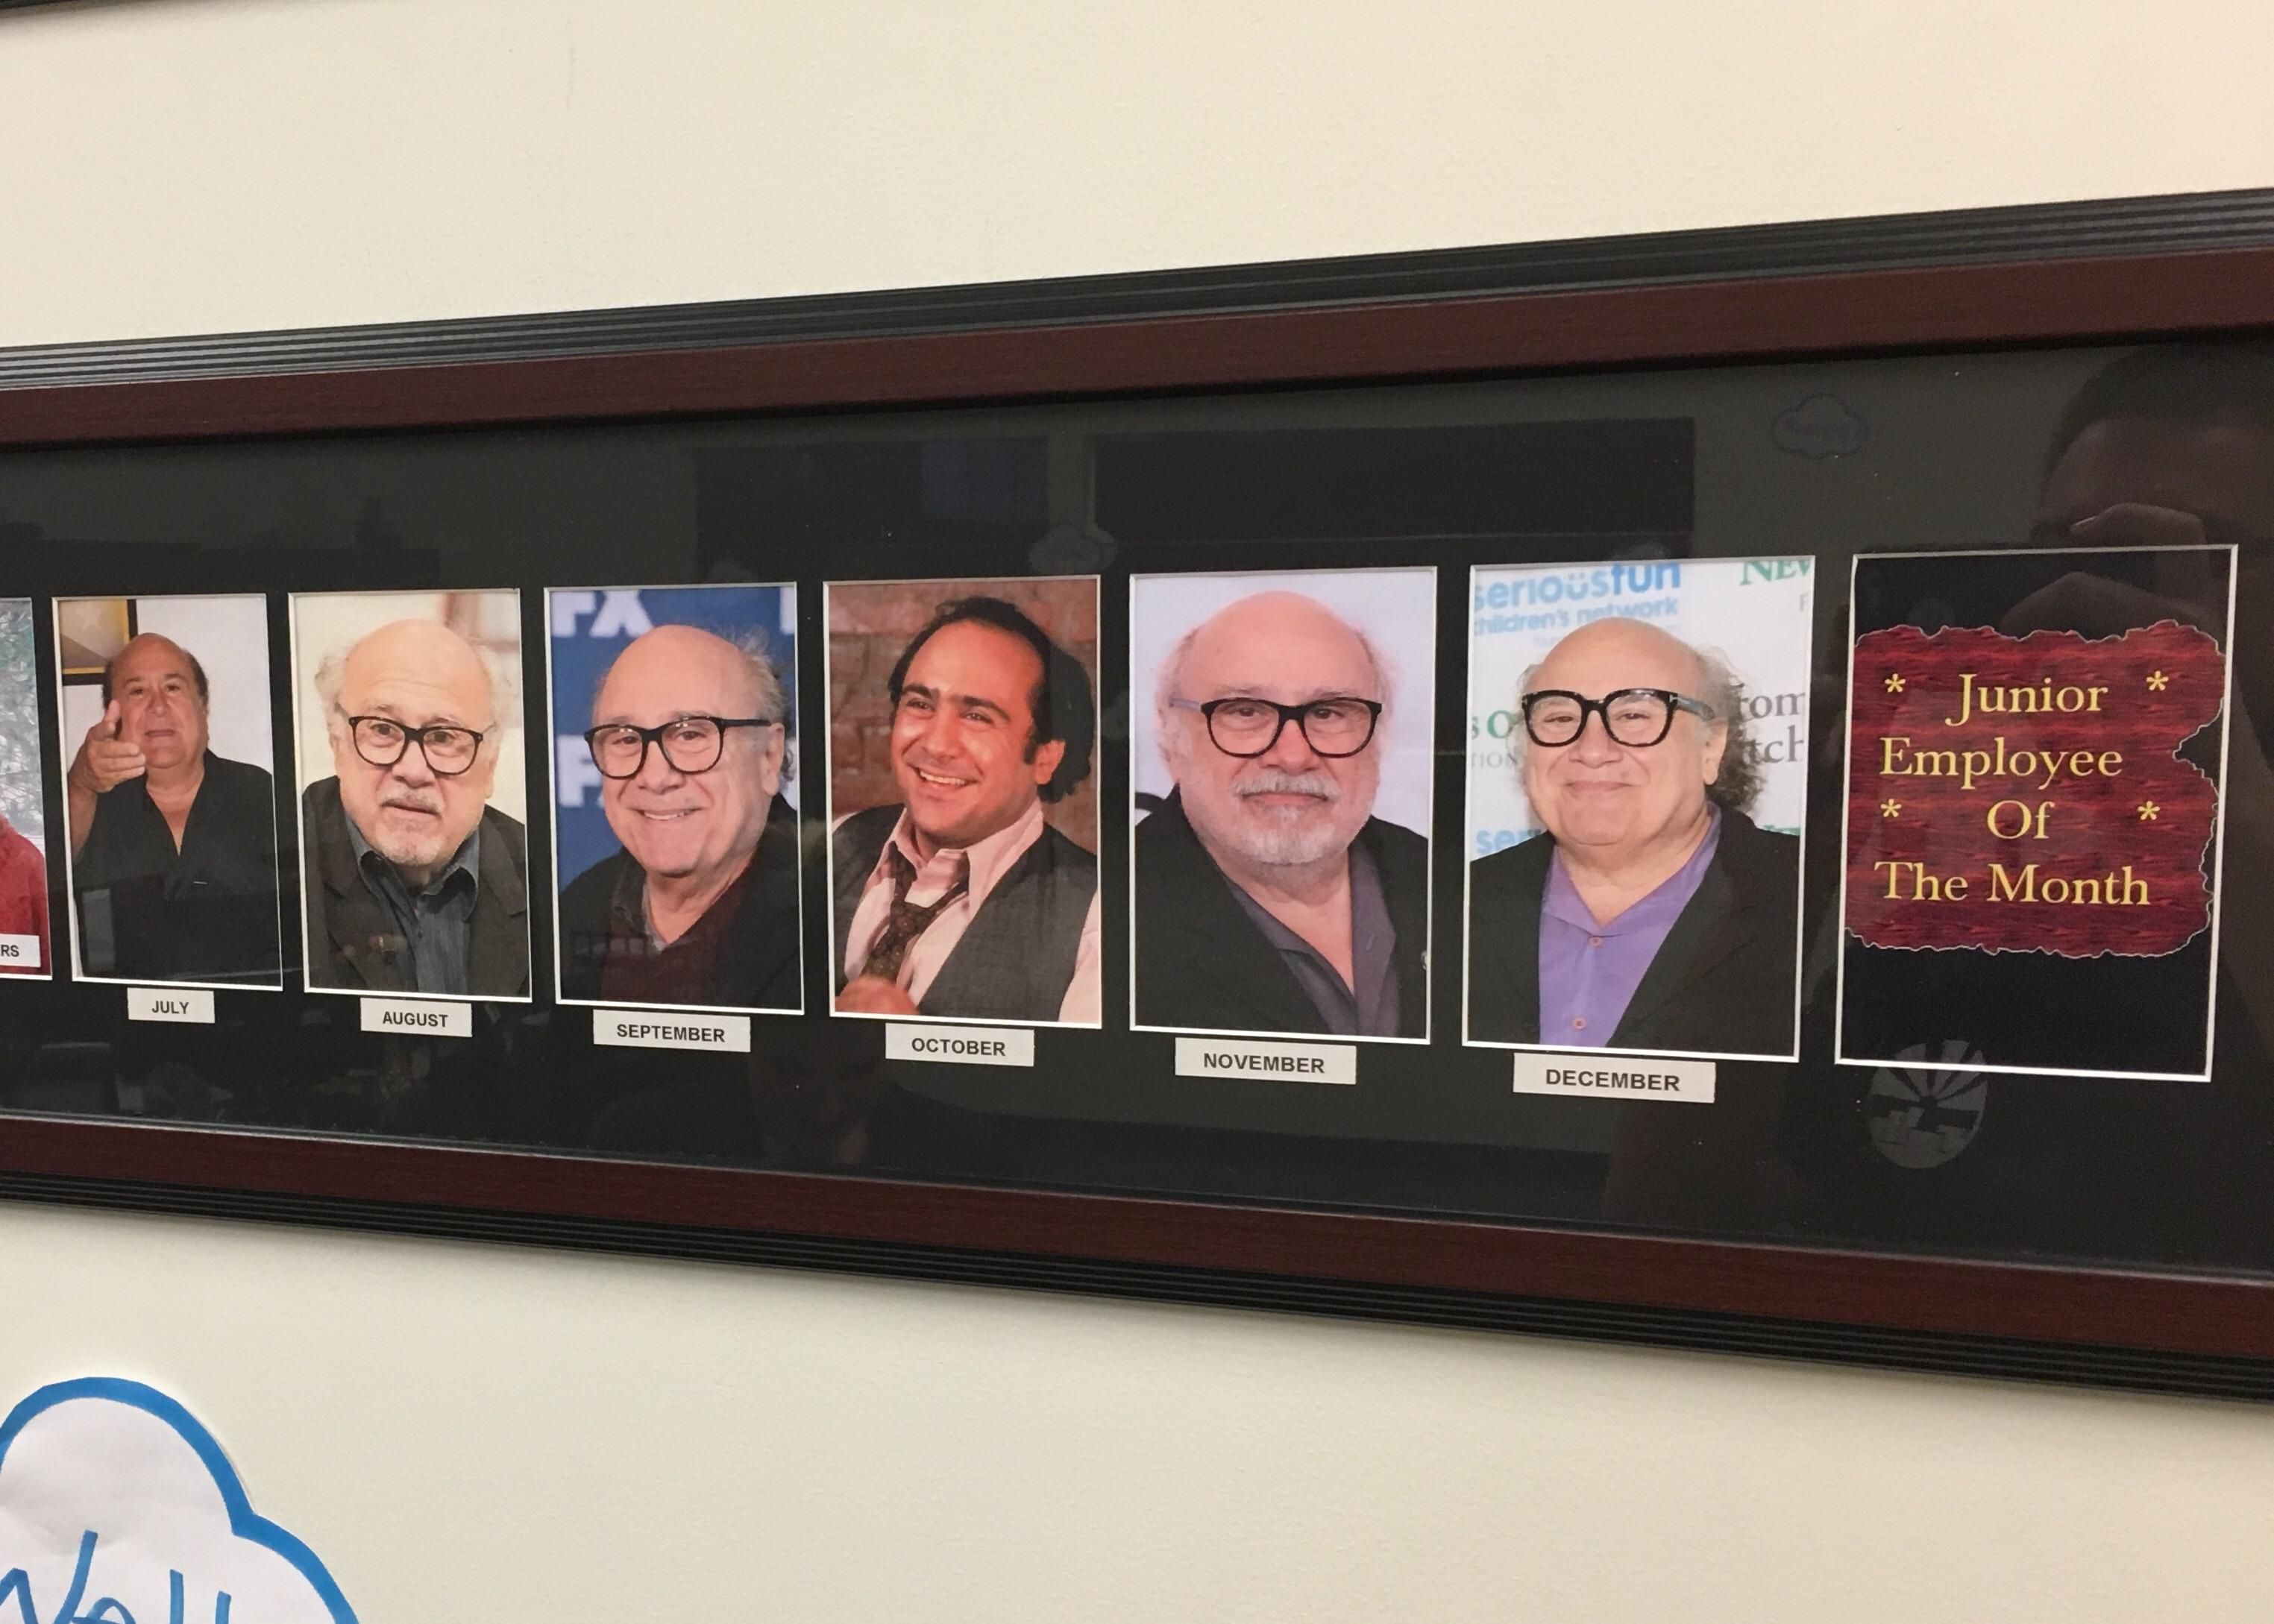 This business I cleaned tonight had Danny Devito as employee of the month for the rest of the year.